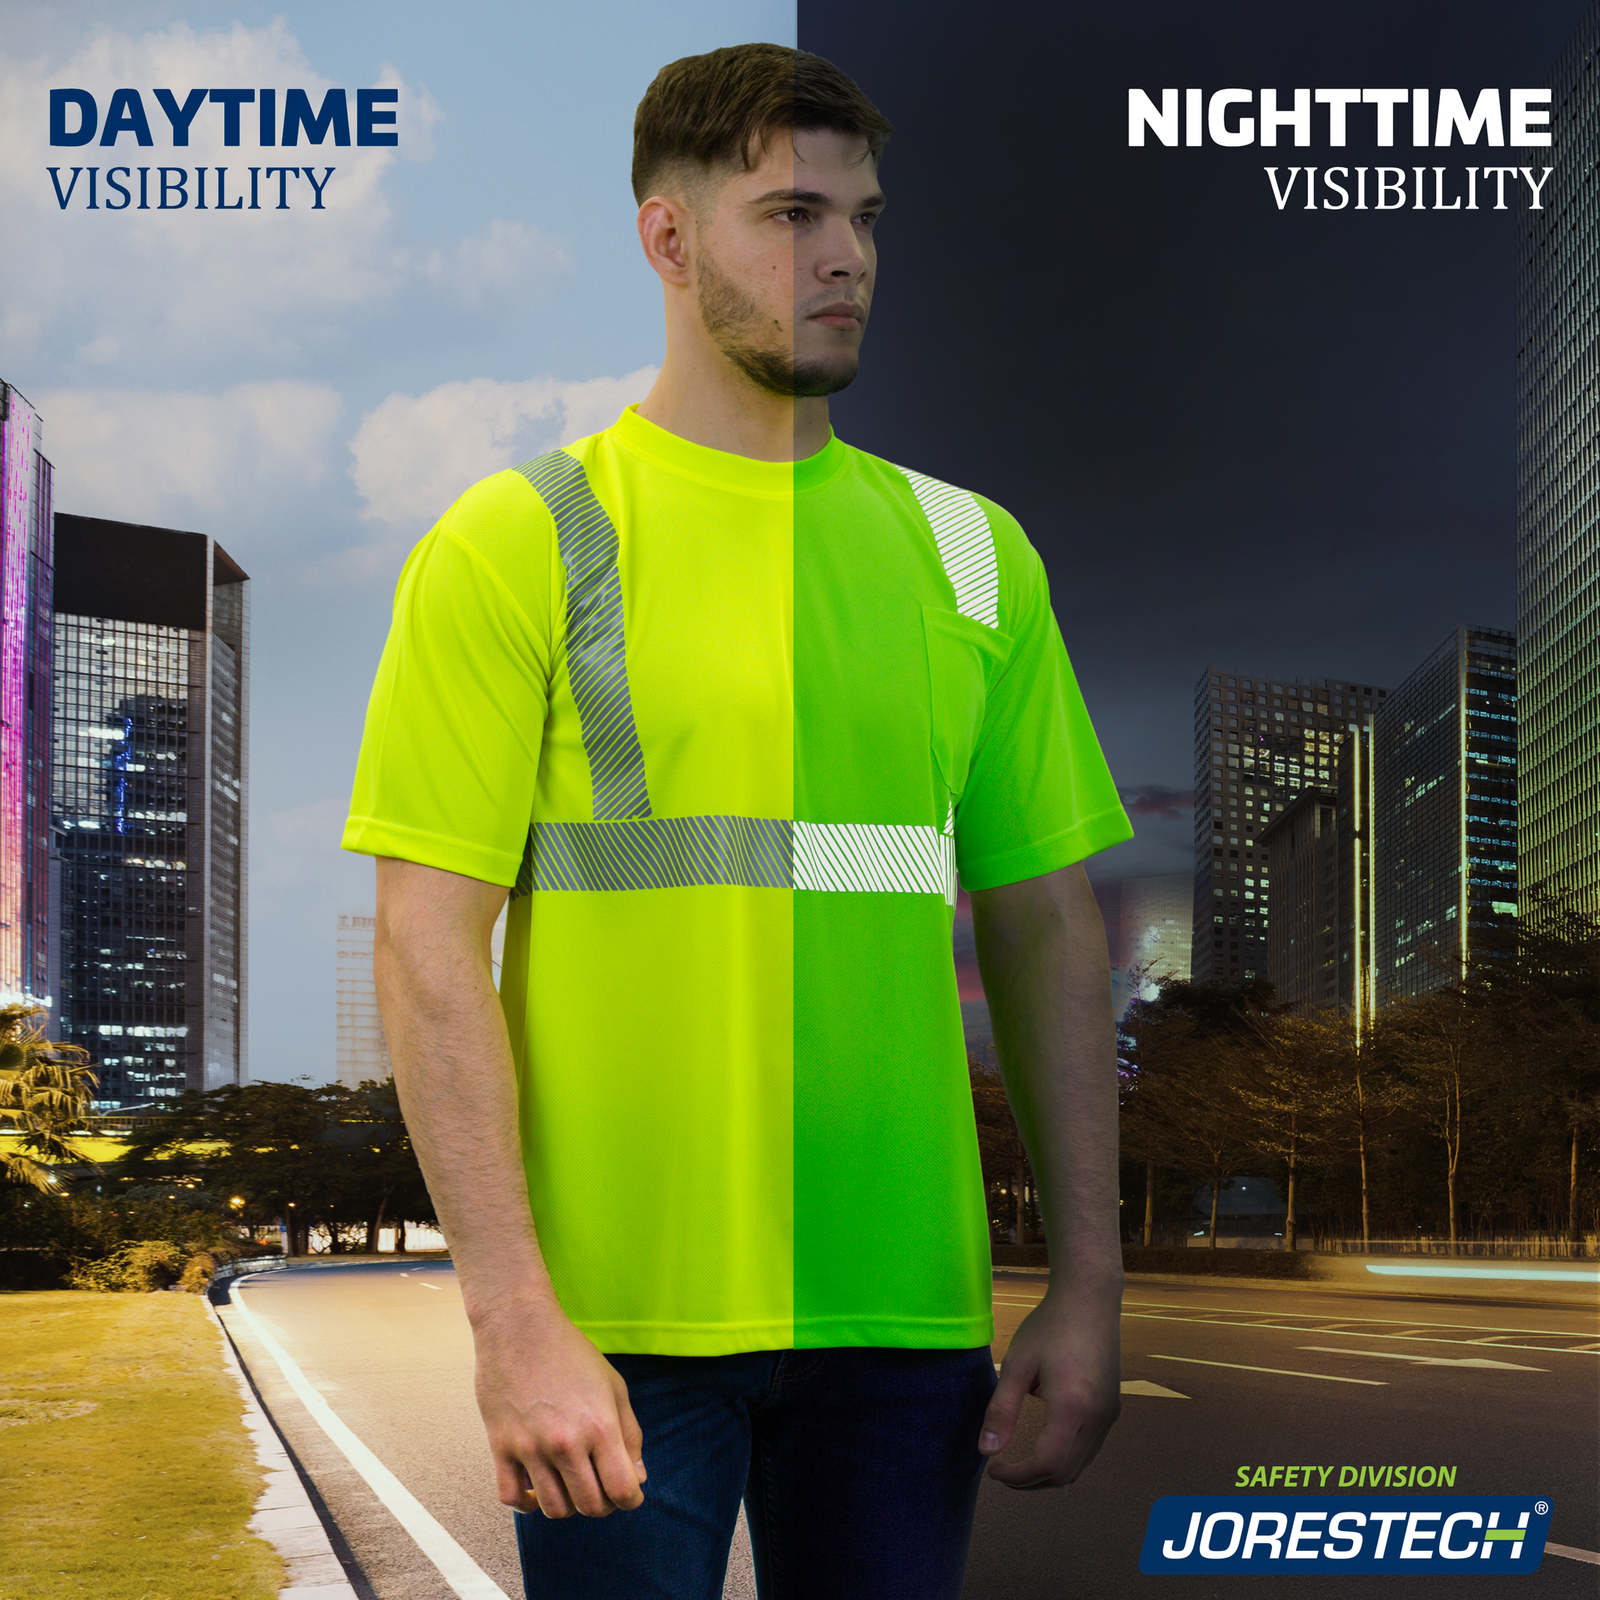 Image of a man standing in the middle of the road while wearing a JORESTECH High Visibility short sleeve yellow safety shirt. The image is divided in the middle and one half has nighttime light while the other has day time light. The image shows the change in colors of the shirt and its hi visibility fabric as well as the segmented reflective material.